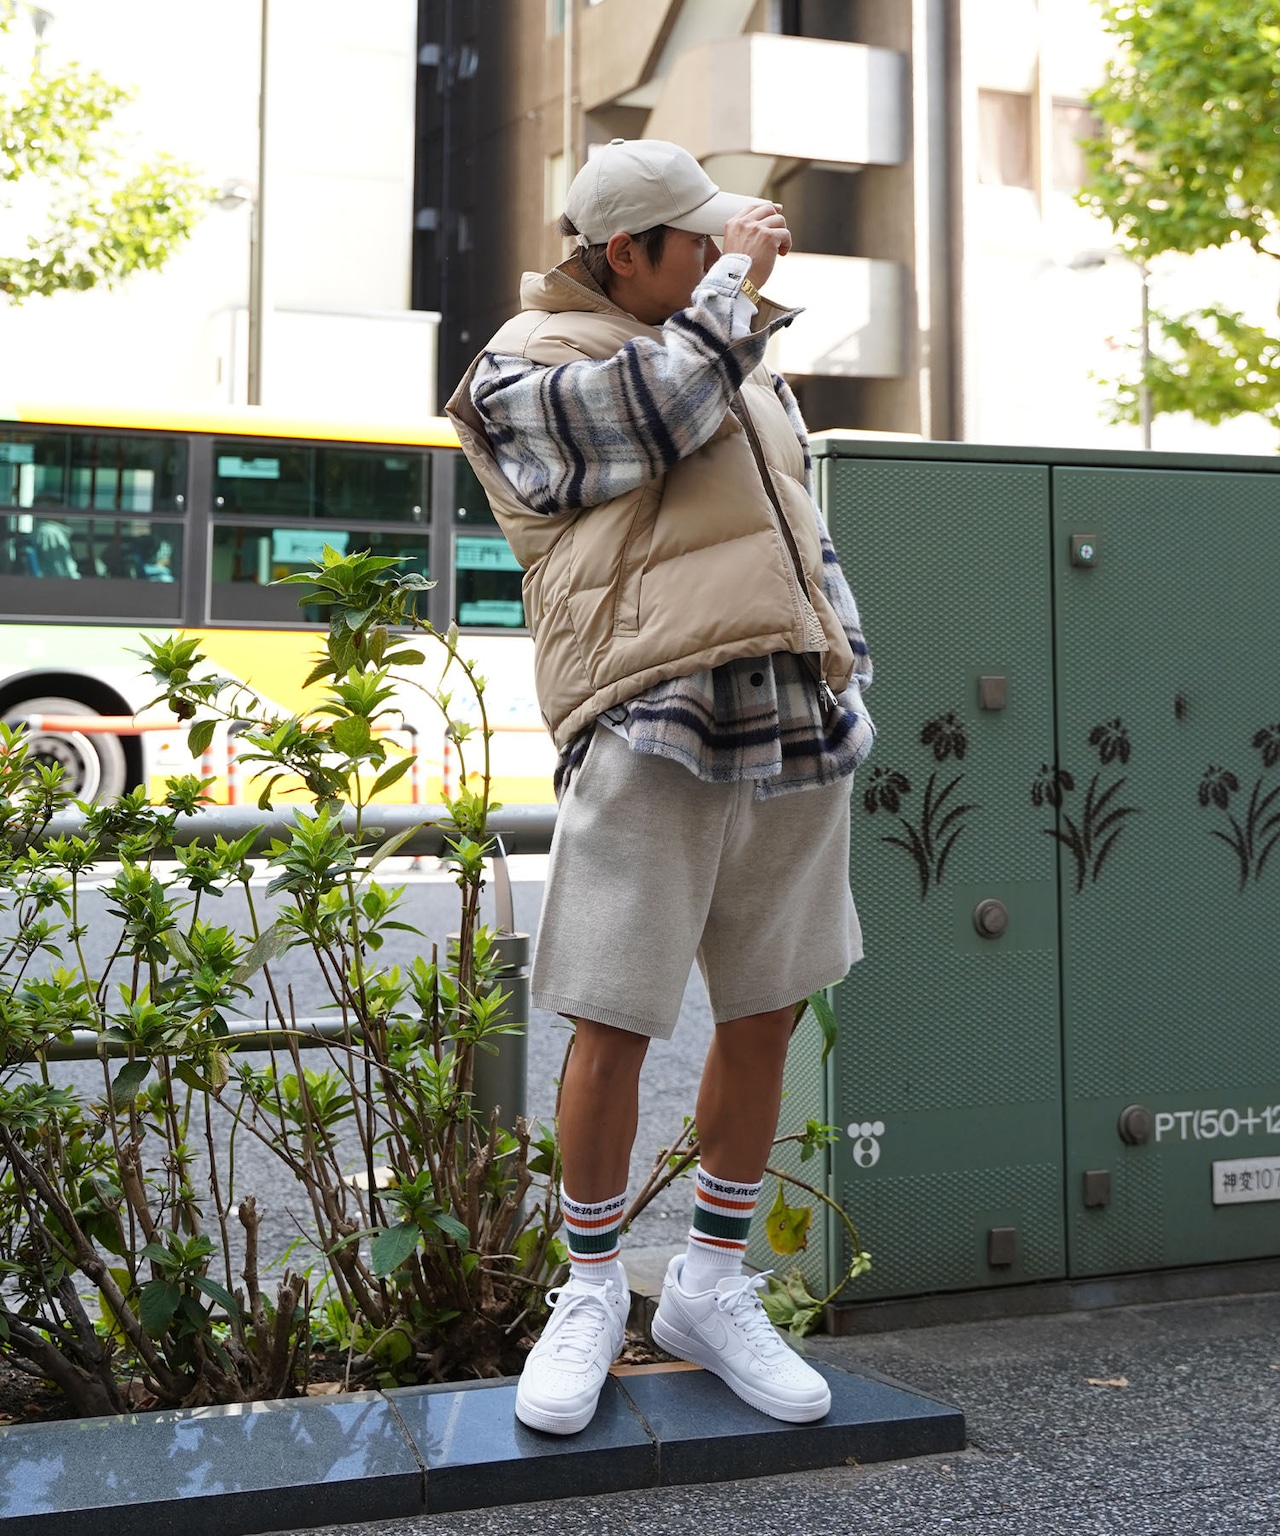 【#Re:room】SOFT SMOOTH WOOL KNIT SHORTS［REK126］